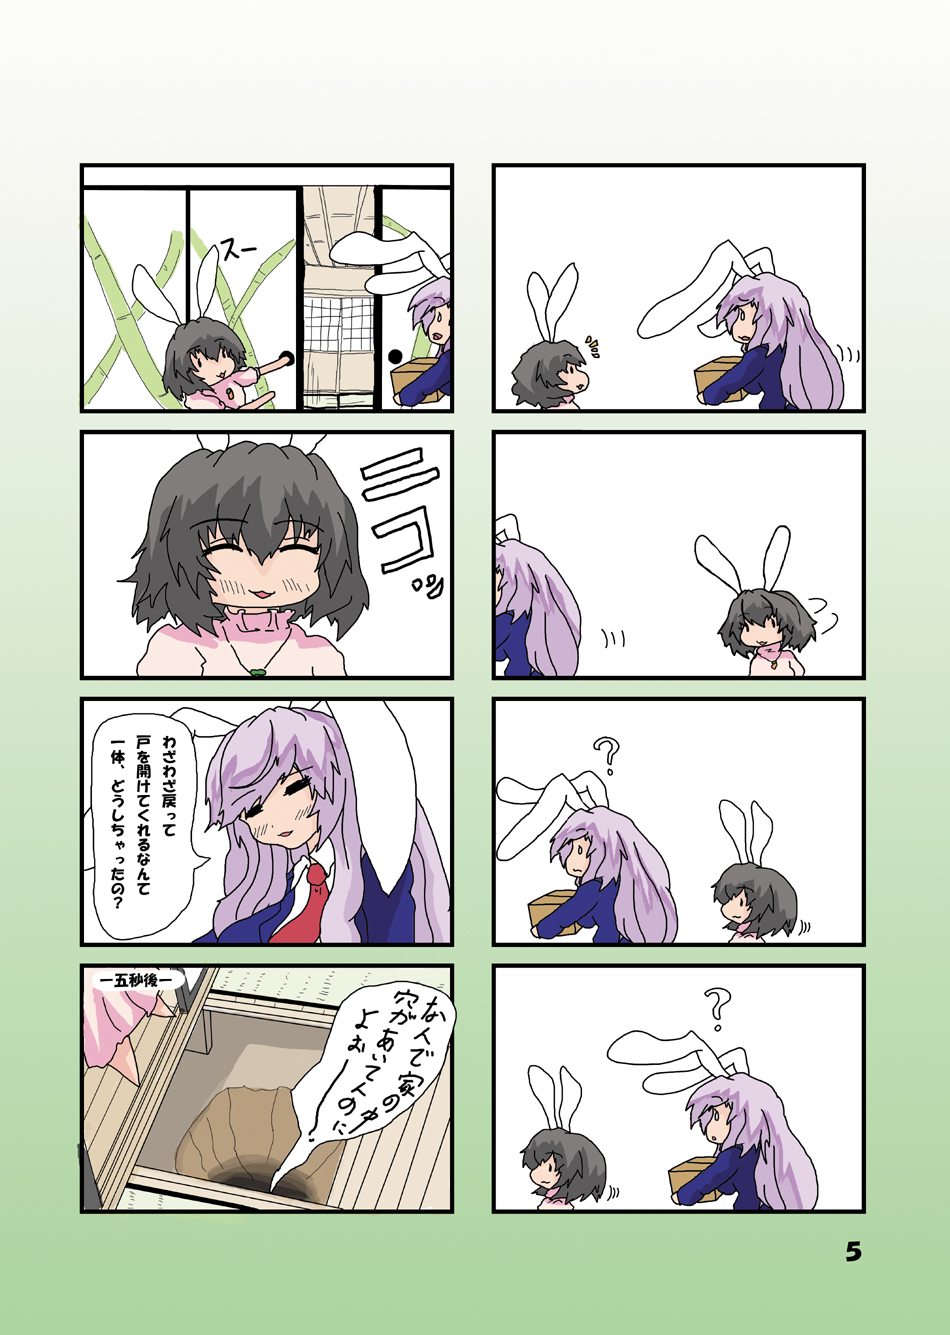 [noizu] 教えてけーね先生×永遠亭の人々 (Touhou Project) page 16 full